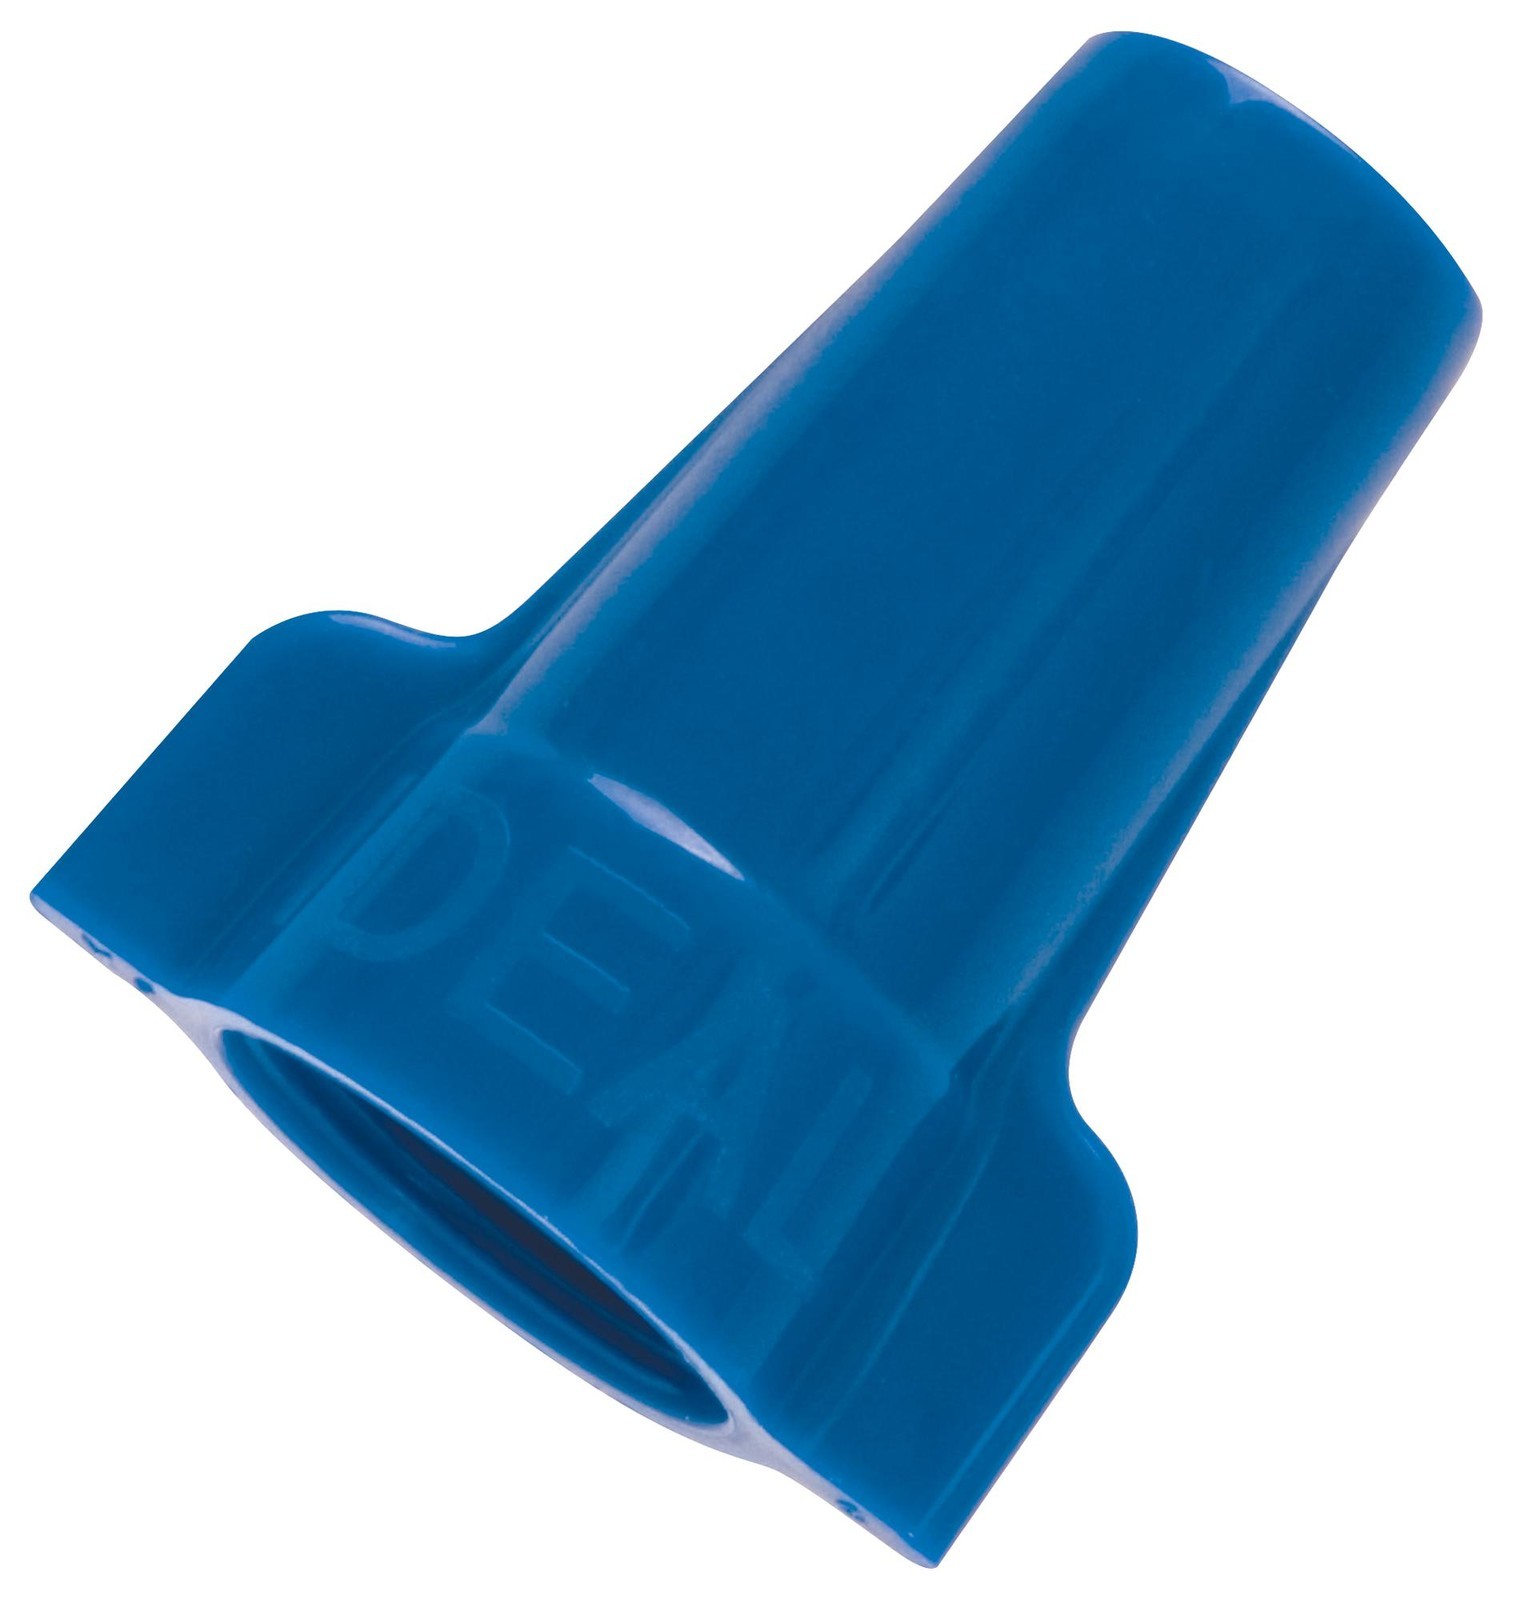 Ideal 30-454 Wing-Nut Wire Connectors, Blue, 25Pk